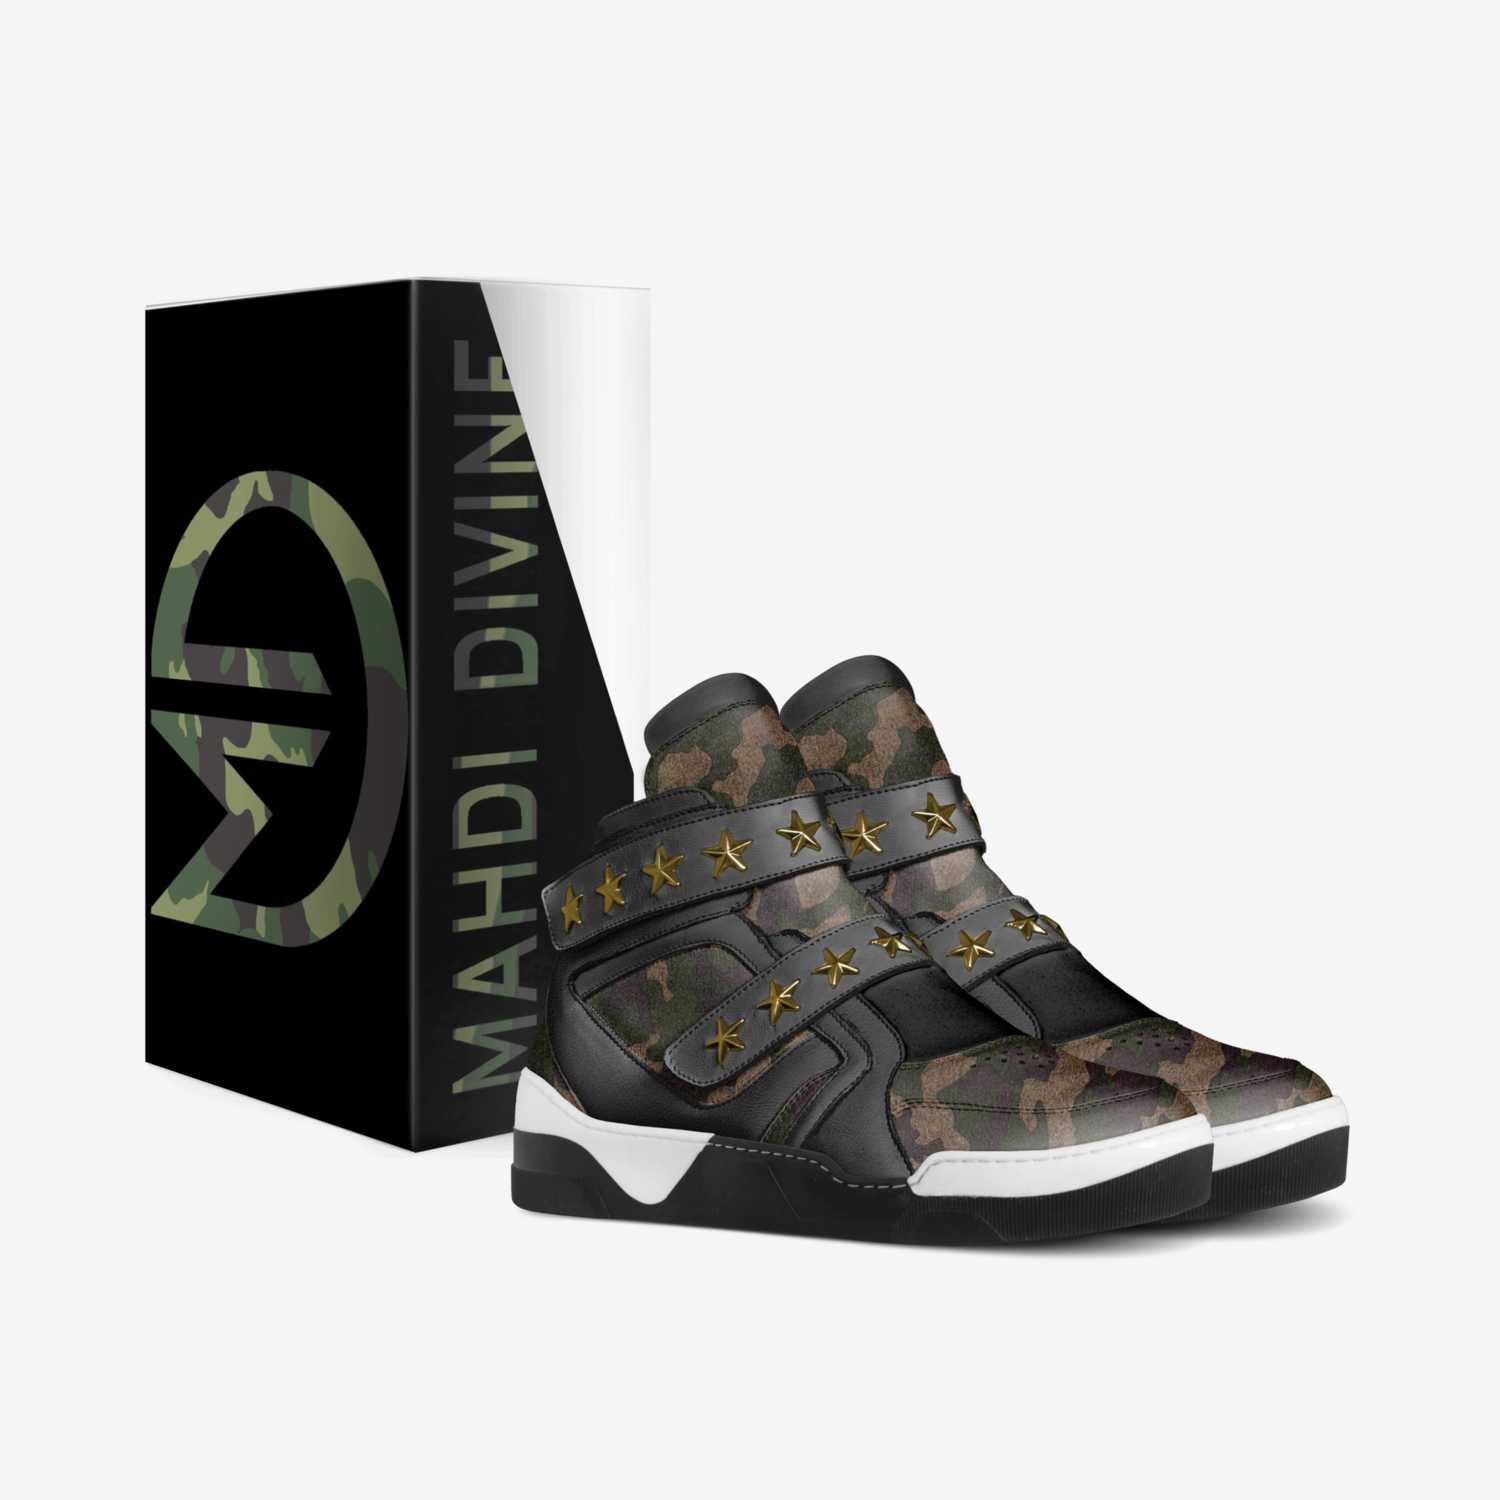 Big Easy custom made in Italy shoes by Mahdi Divine | Box view